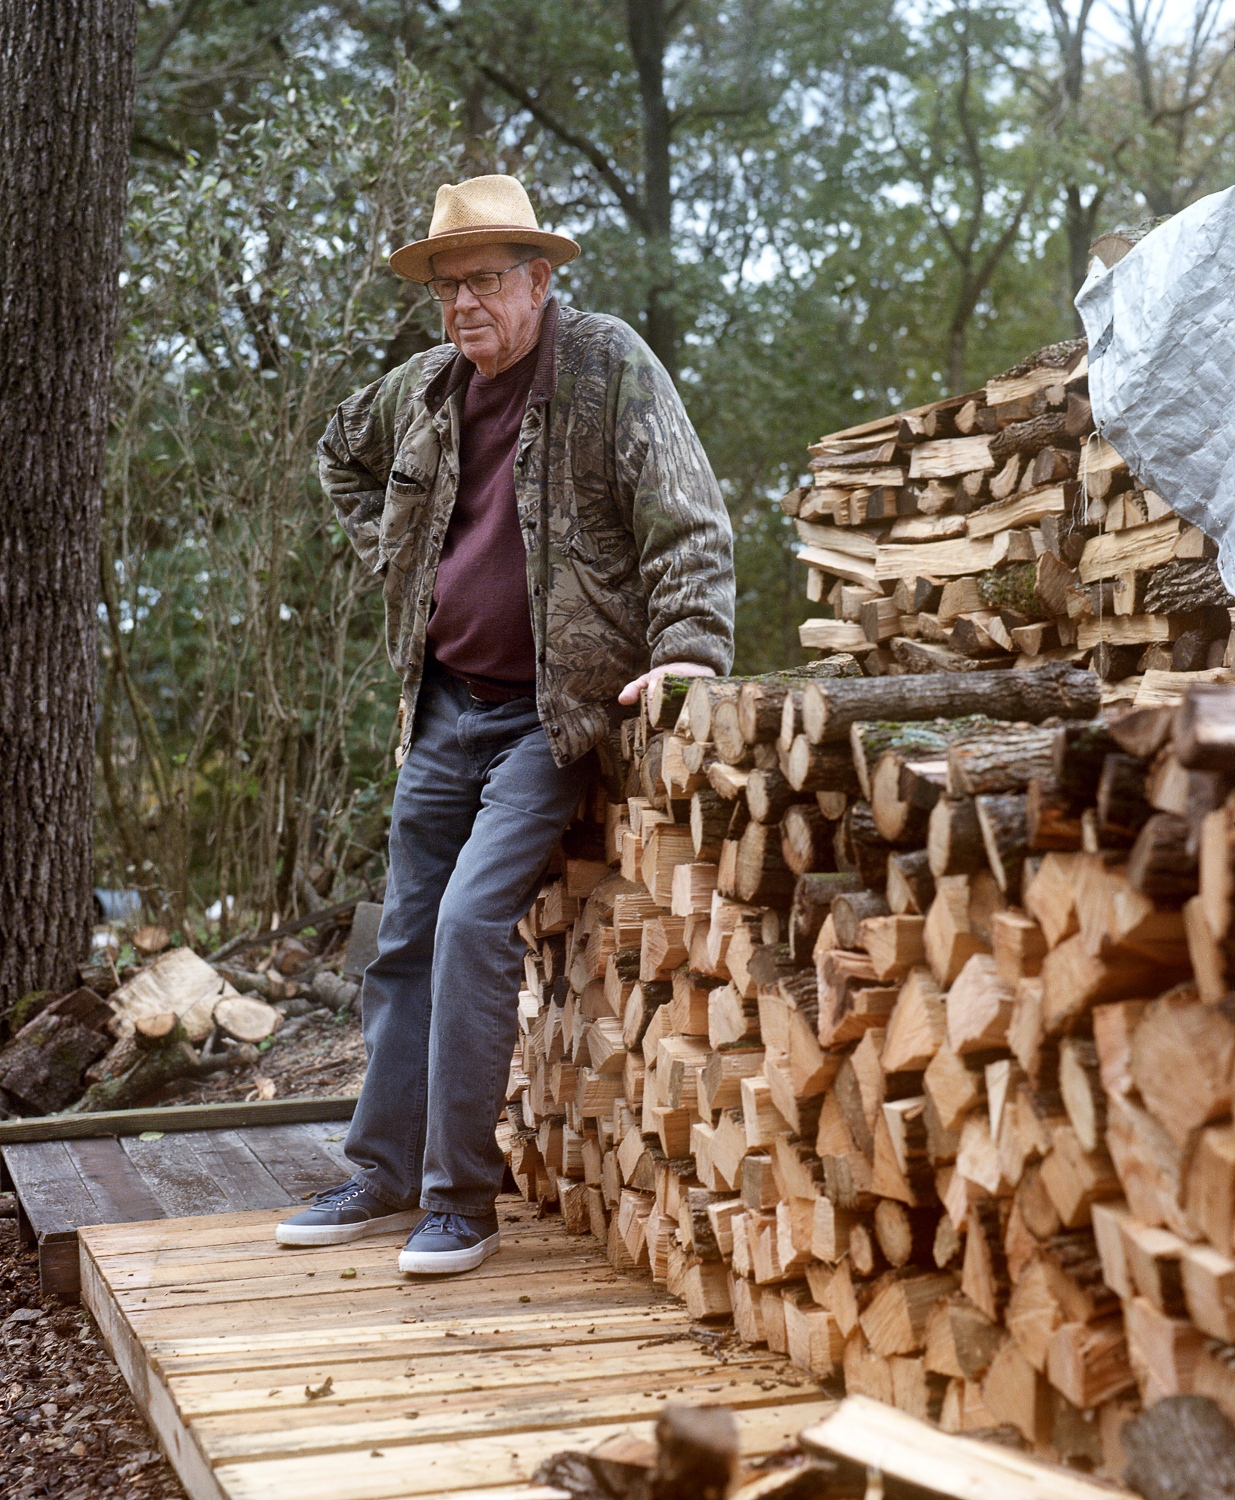 Love, Dad - Grandpa Posing by the Wood Pile